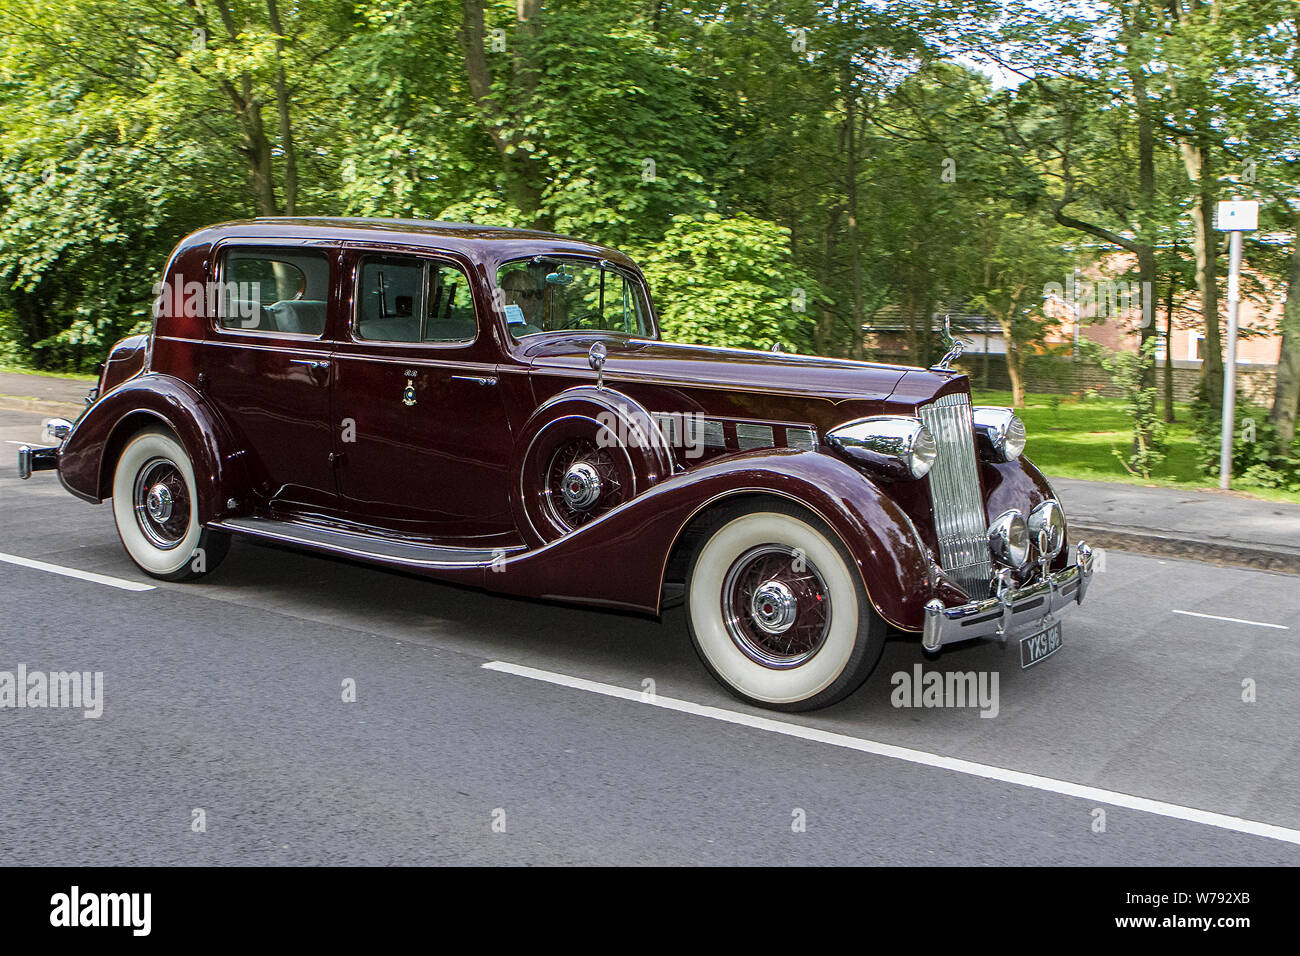 Packard Sedan; vintage motors and collectibles 2019; Lytham Hall transport show, collection of cars & veteran vehicles of yesteryear. Stock Photo